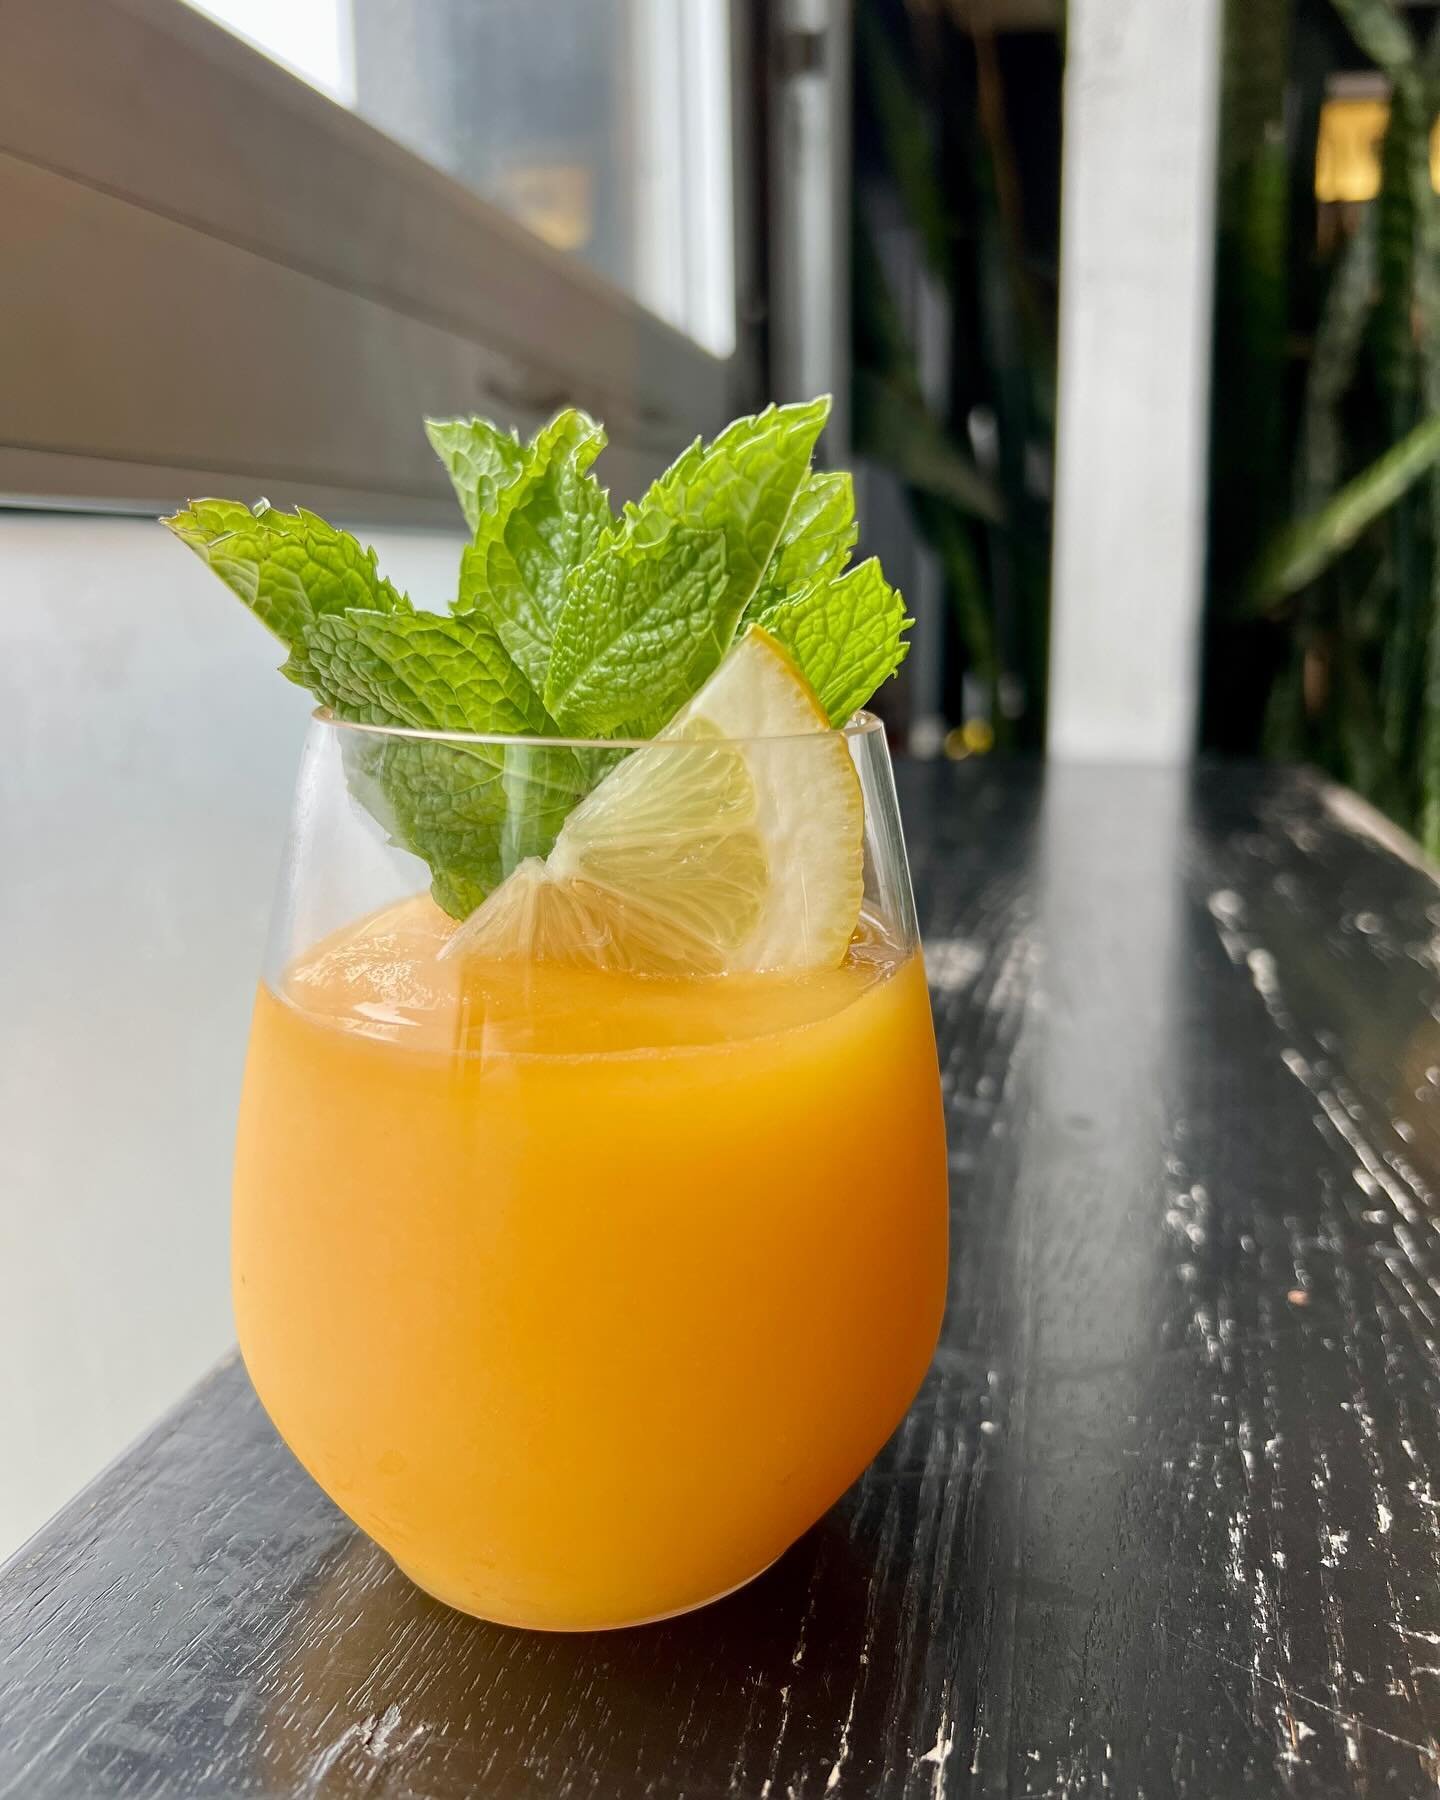 Oooooh boy. Do we have a treat for you! Come check out our new featured frozen drink! It&rsquo;s a beautifully balanced bouquet of Tequila, Tangerine, Mint, and Lemon for just $11! Get one quick before you miss this citrus! #denvercocktails #denverha